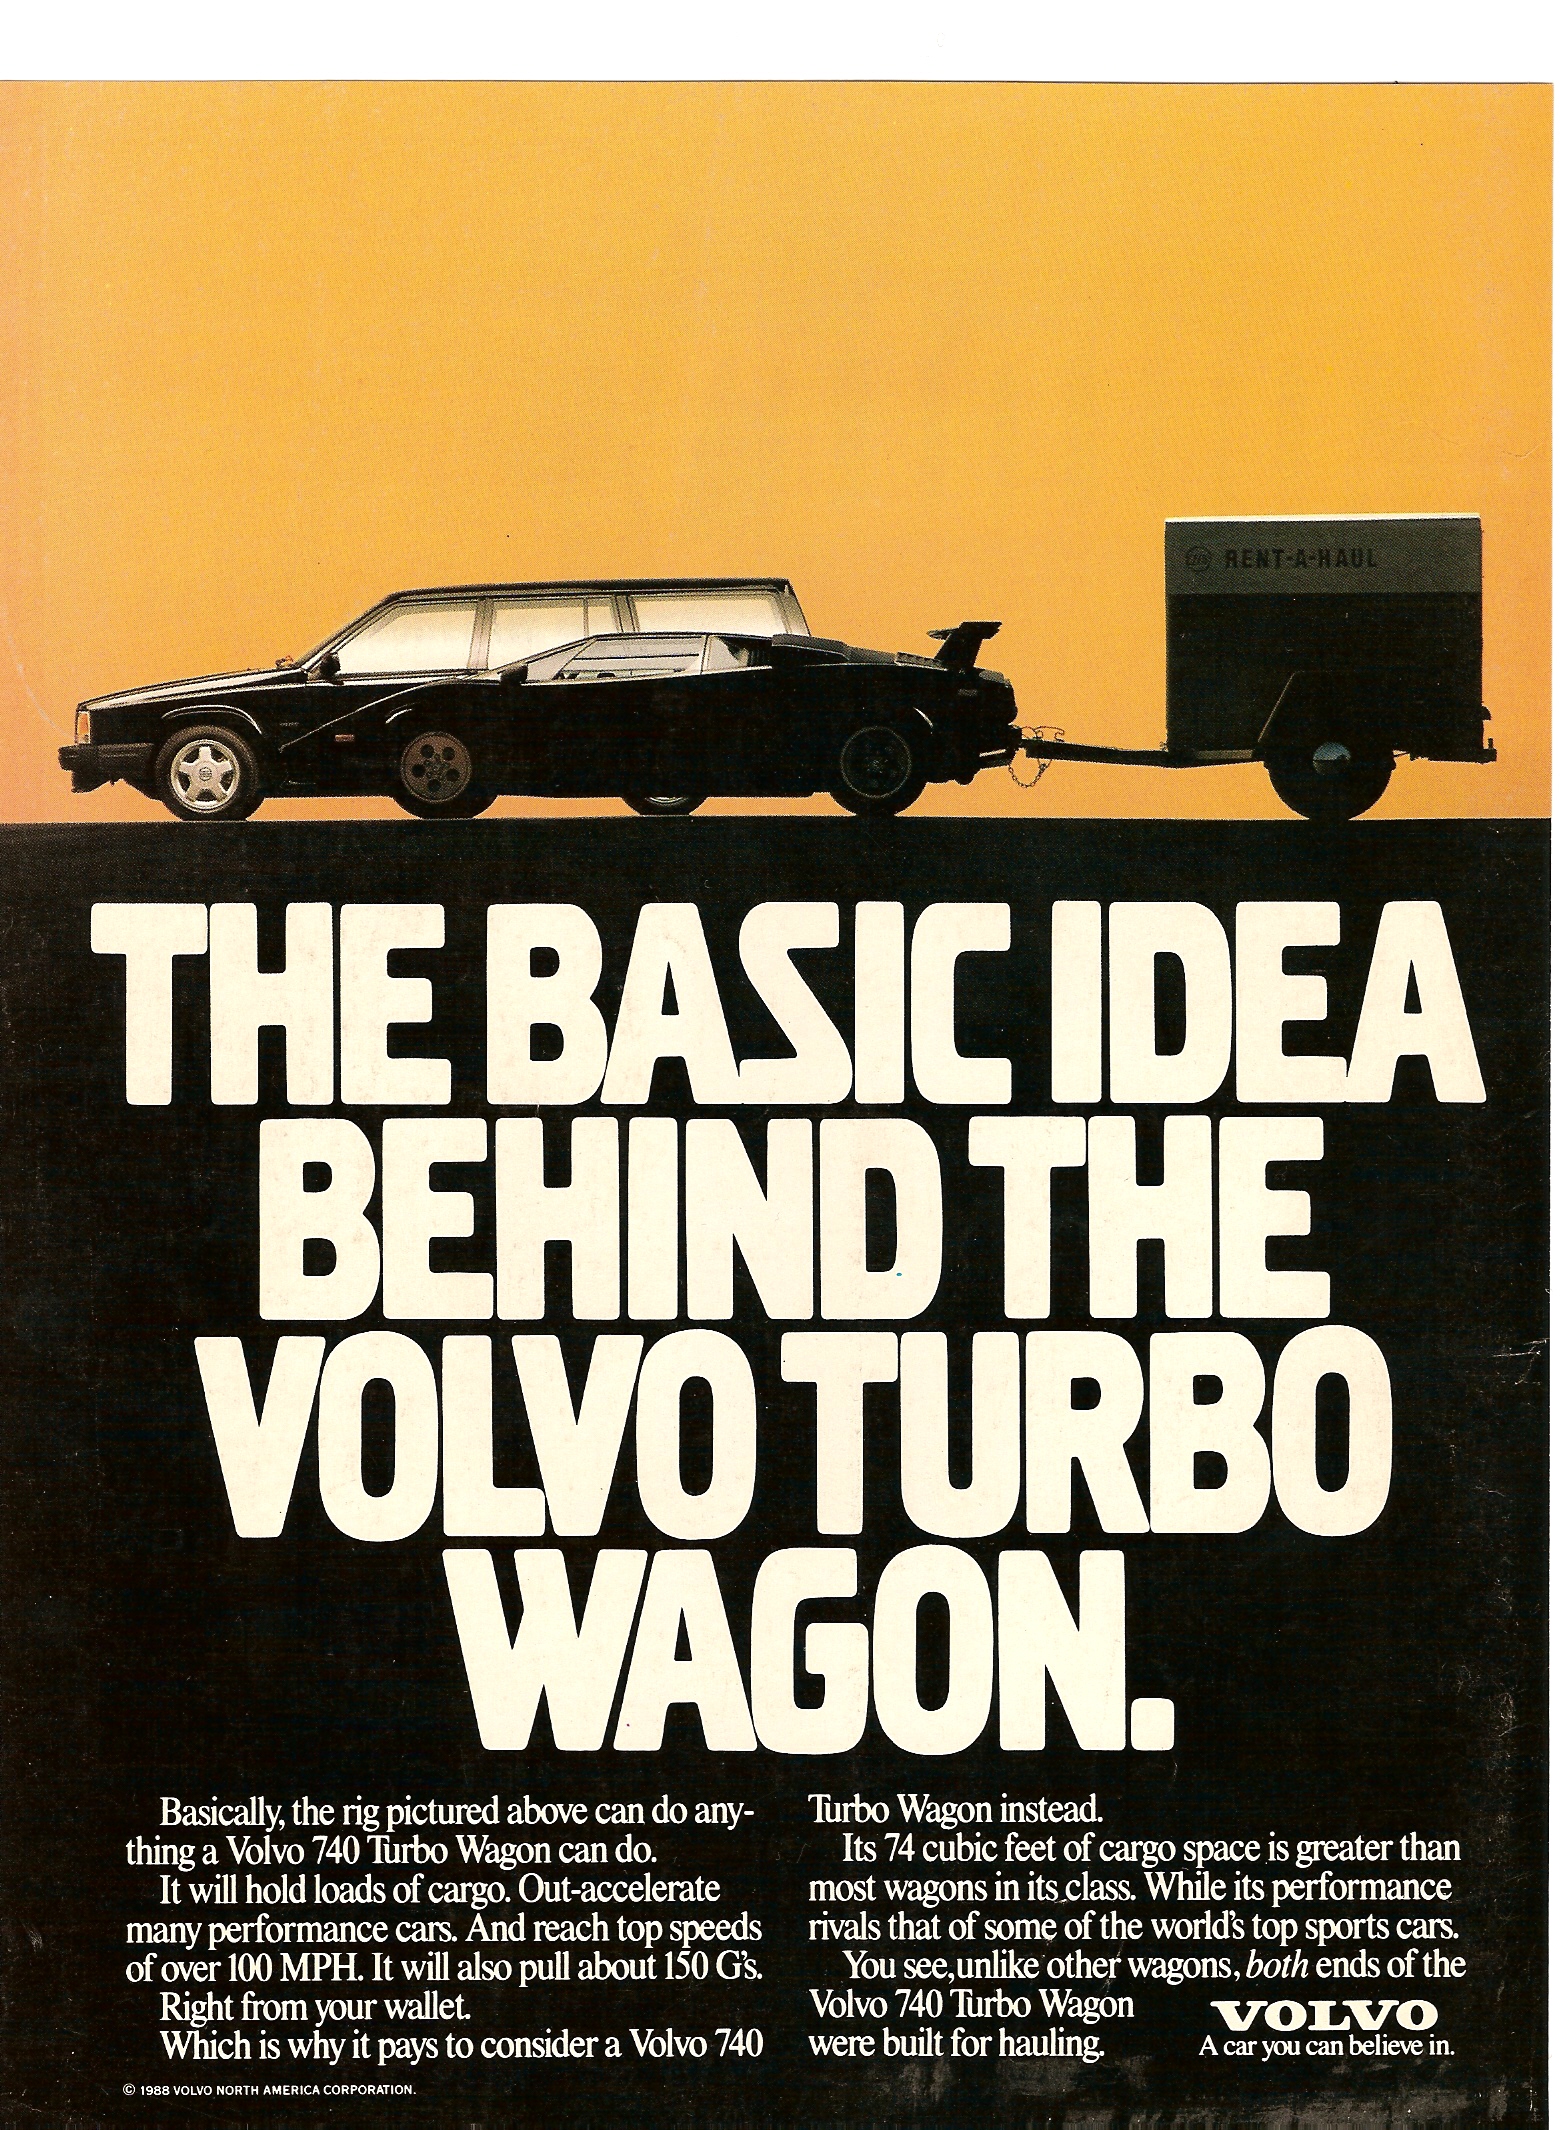 Basically, the rig pictured above can do anything a Volvo 740 Turbo Wagon